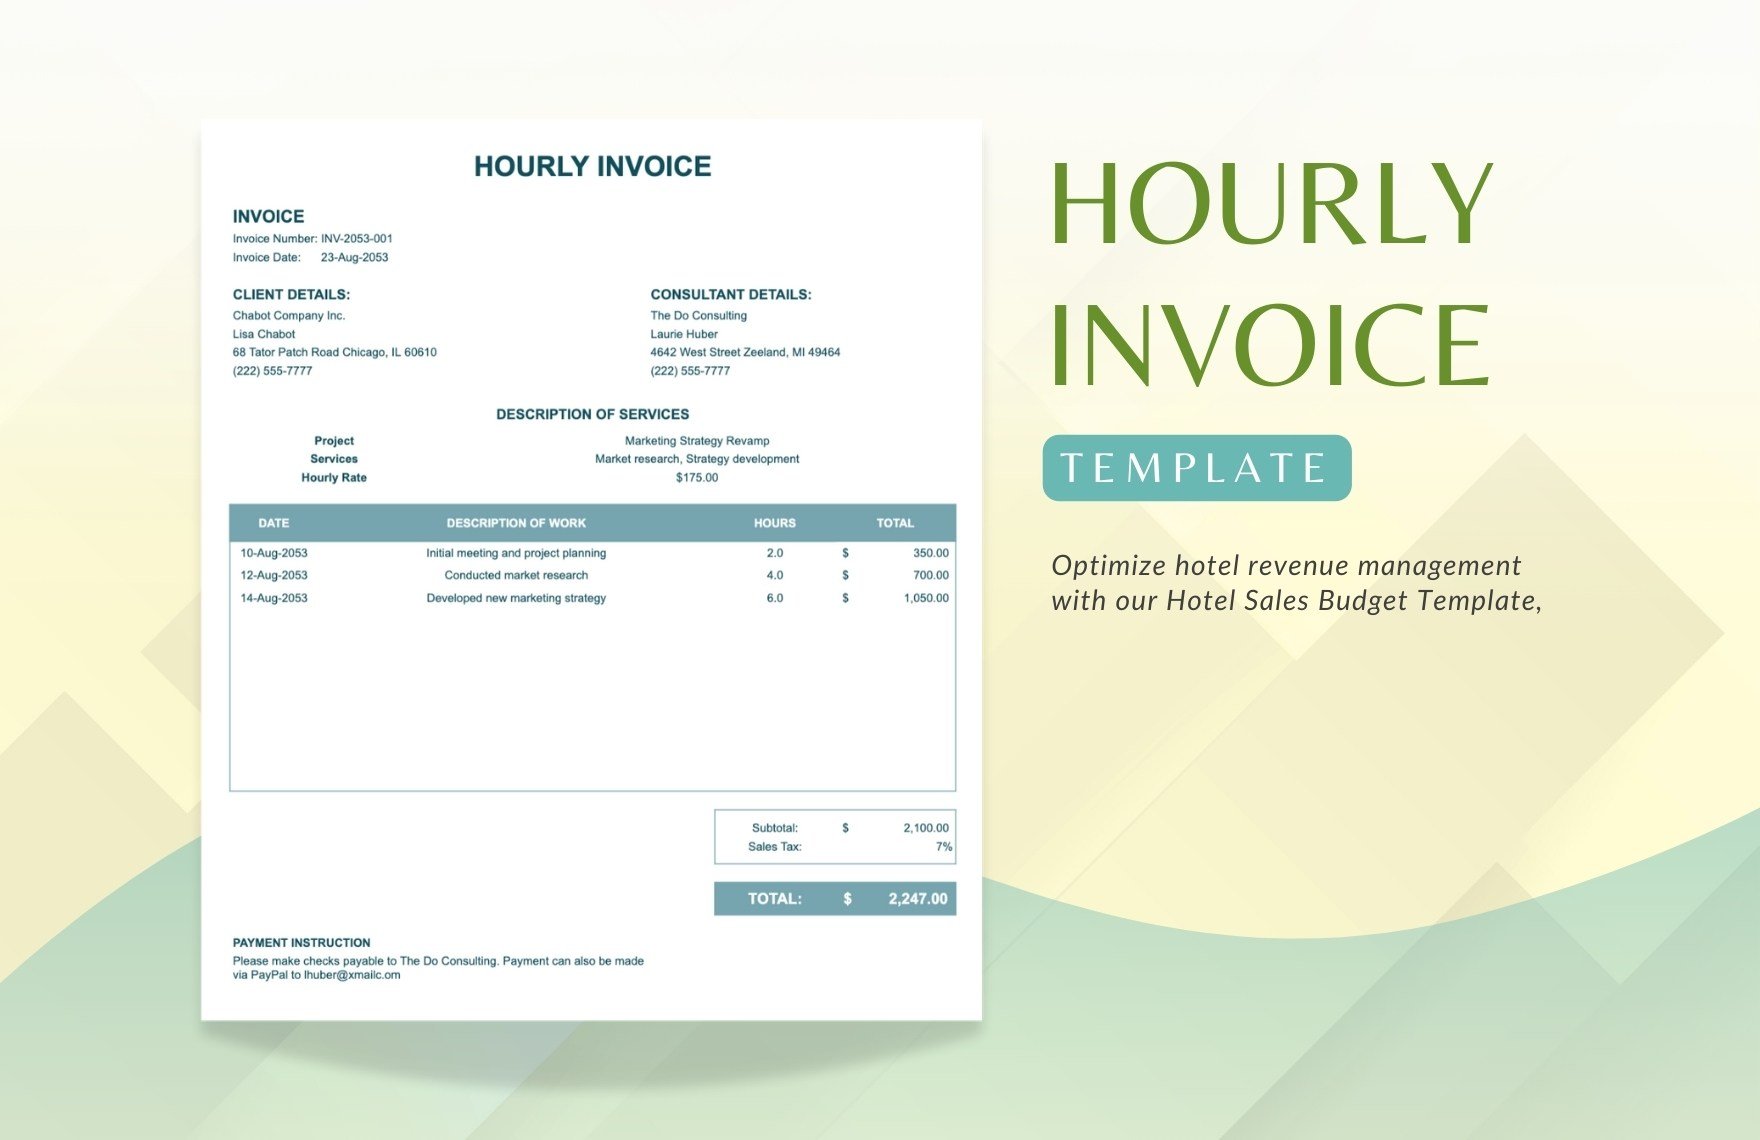 Free Hourly Invoice Template in Excel, Google Sheets